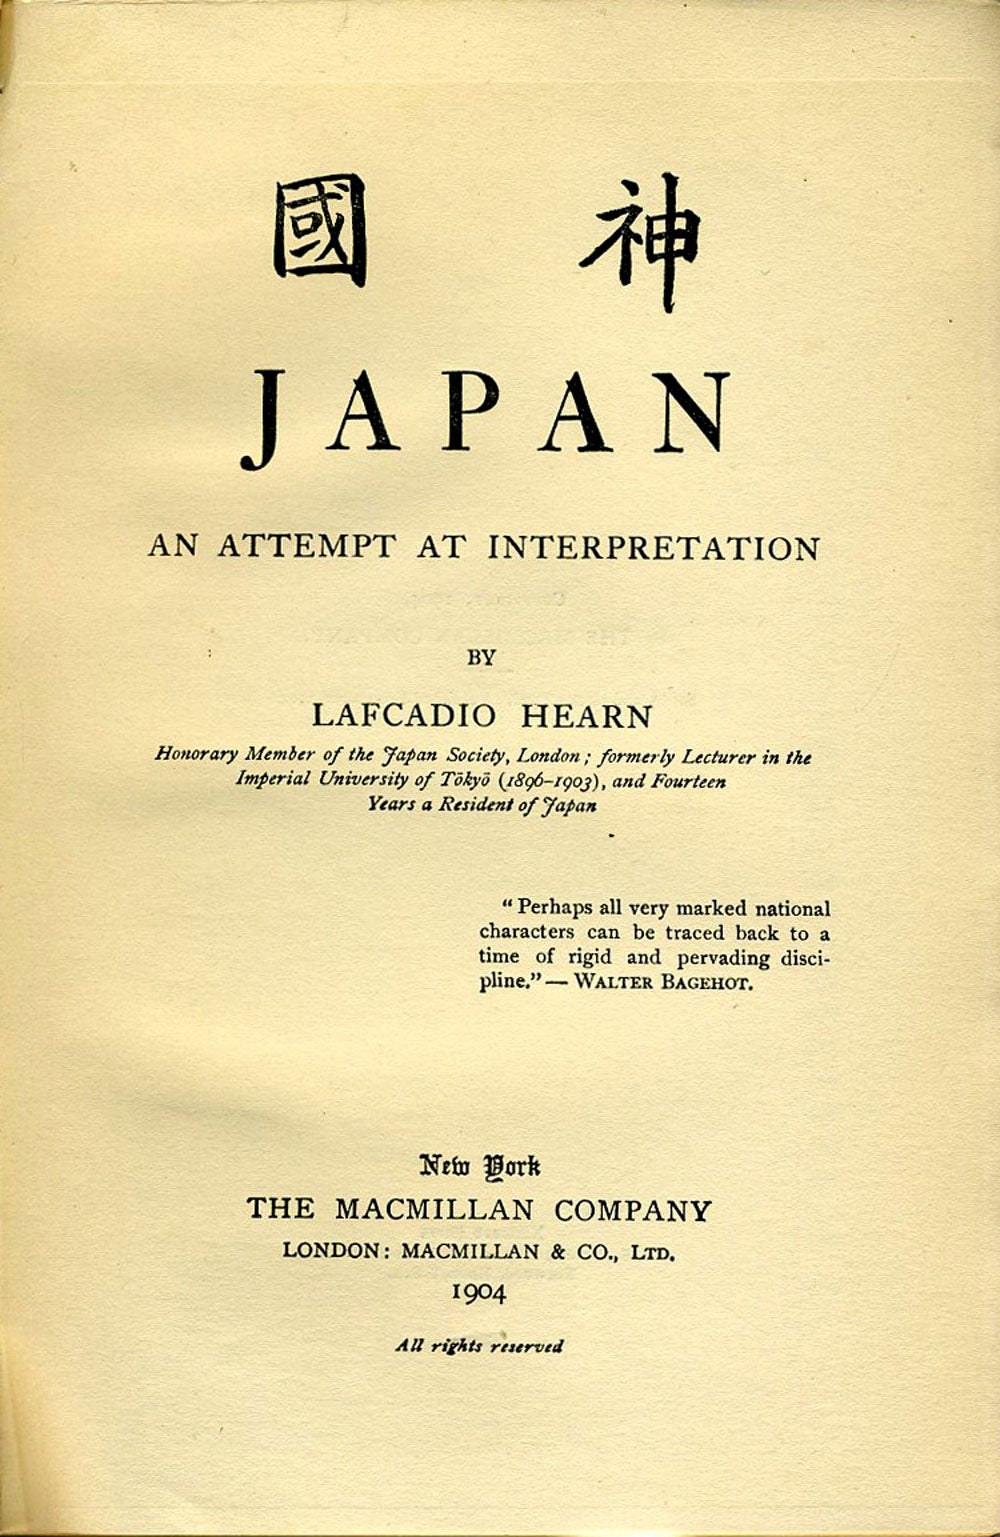 Japan. An Attempt at Interpretation by Lafcadio Hearn on Antipodean Books,  Maps & Prints